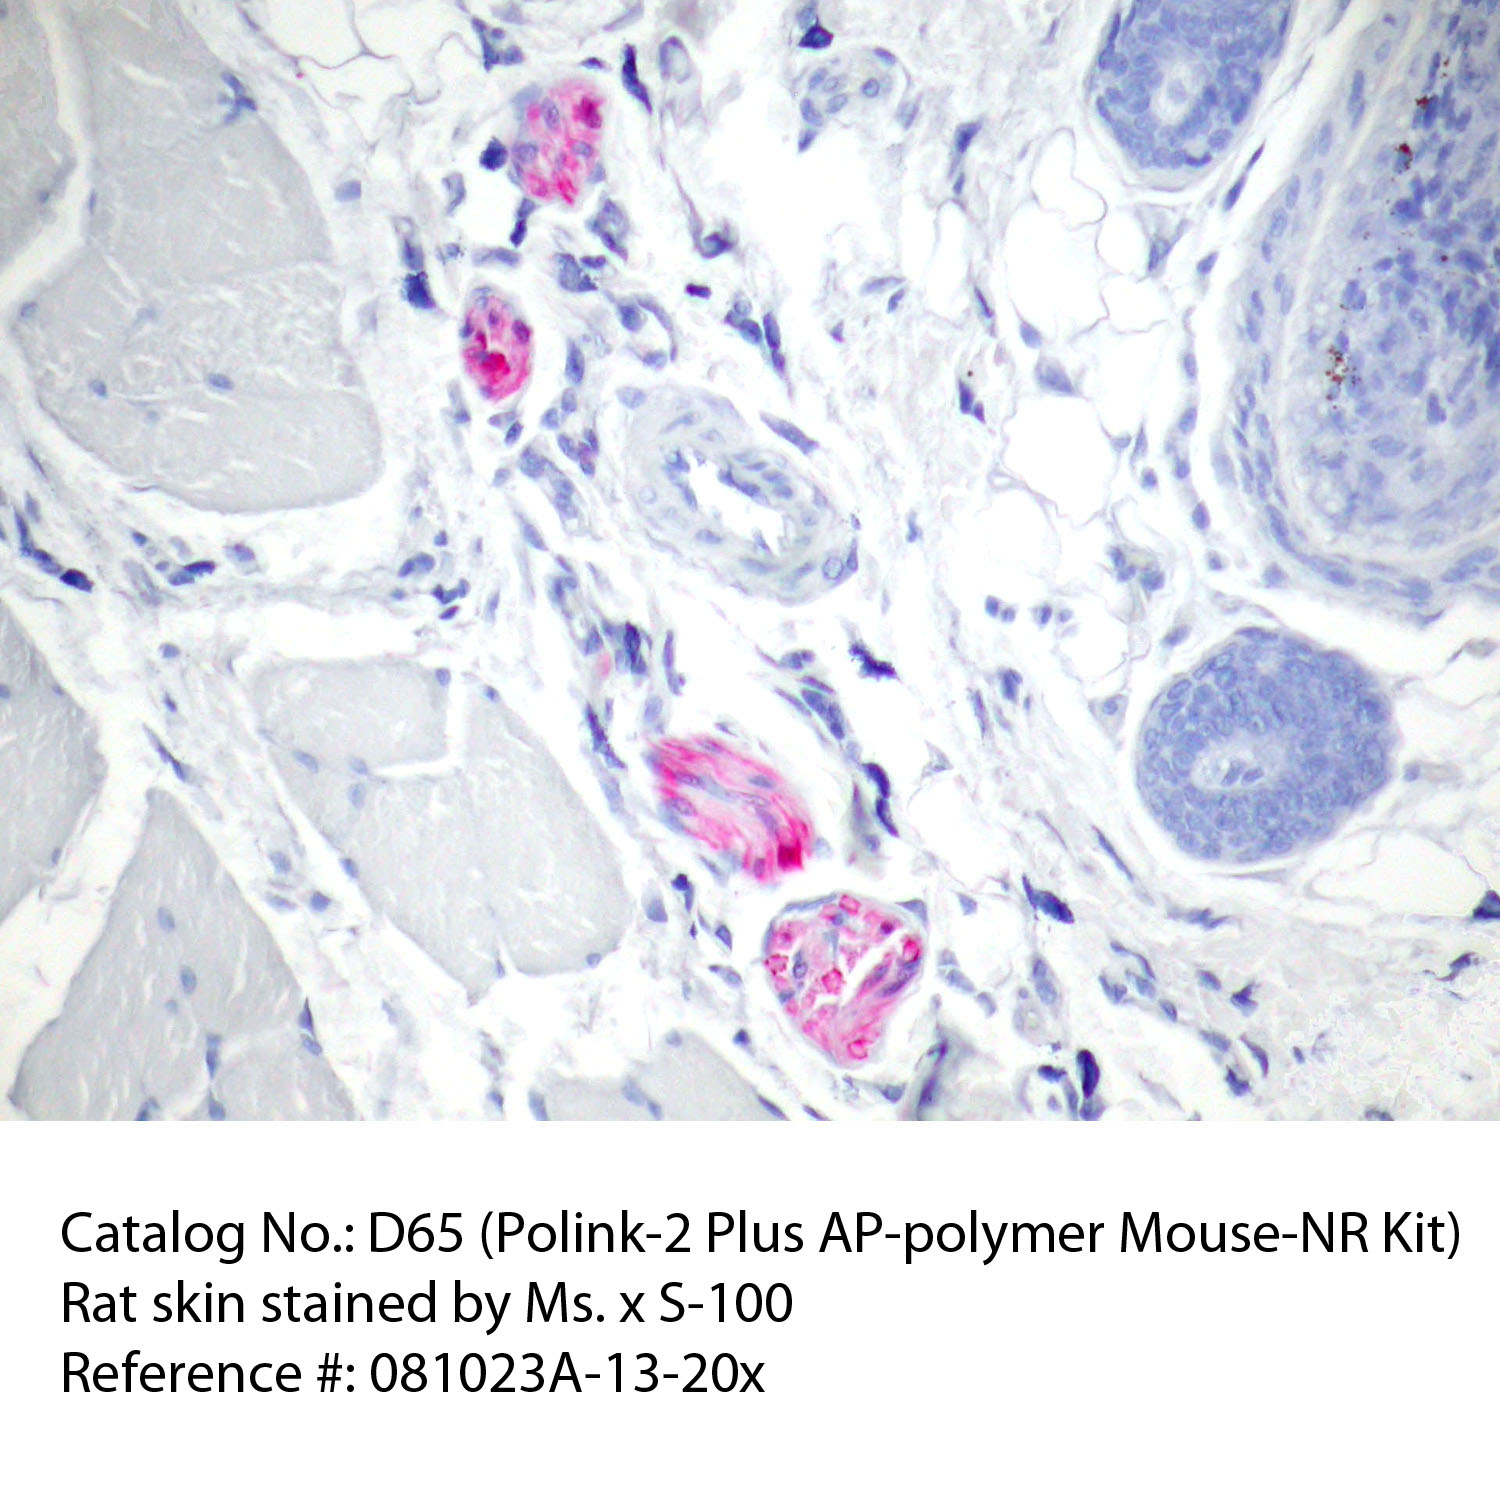 IHC staining of FFPE rat skin tissue within normal limits using mouse anti-S-100 polyclonal antibody and Polink-2 Plus AP Mouse-NR detection kit [D65-18]. The red stain indicates positive stain and blue is the counter stain. It is mounted using a permanent aqueous mounting medium [E03-18].